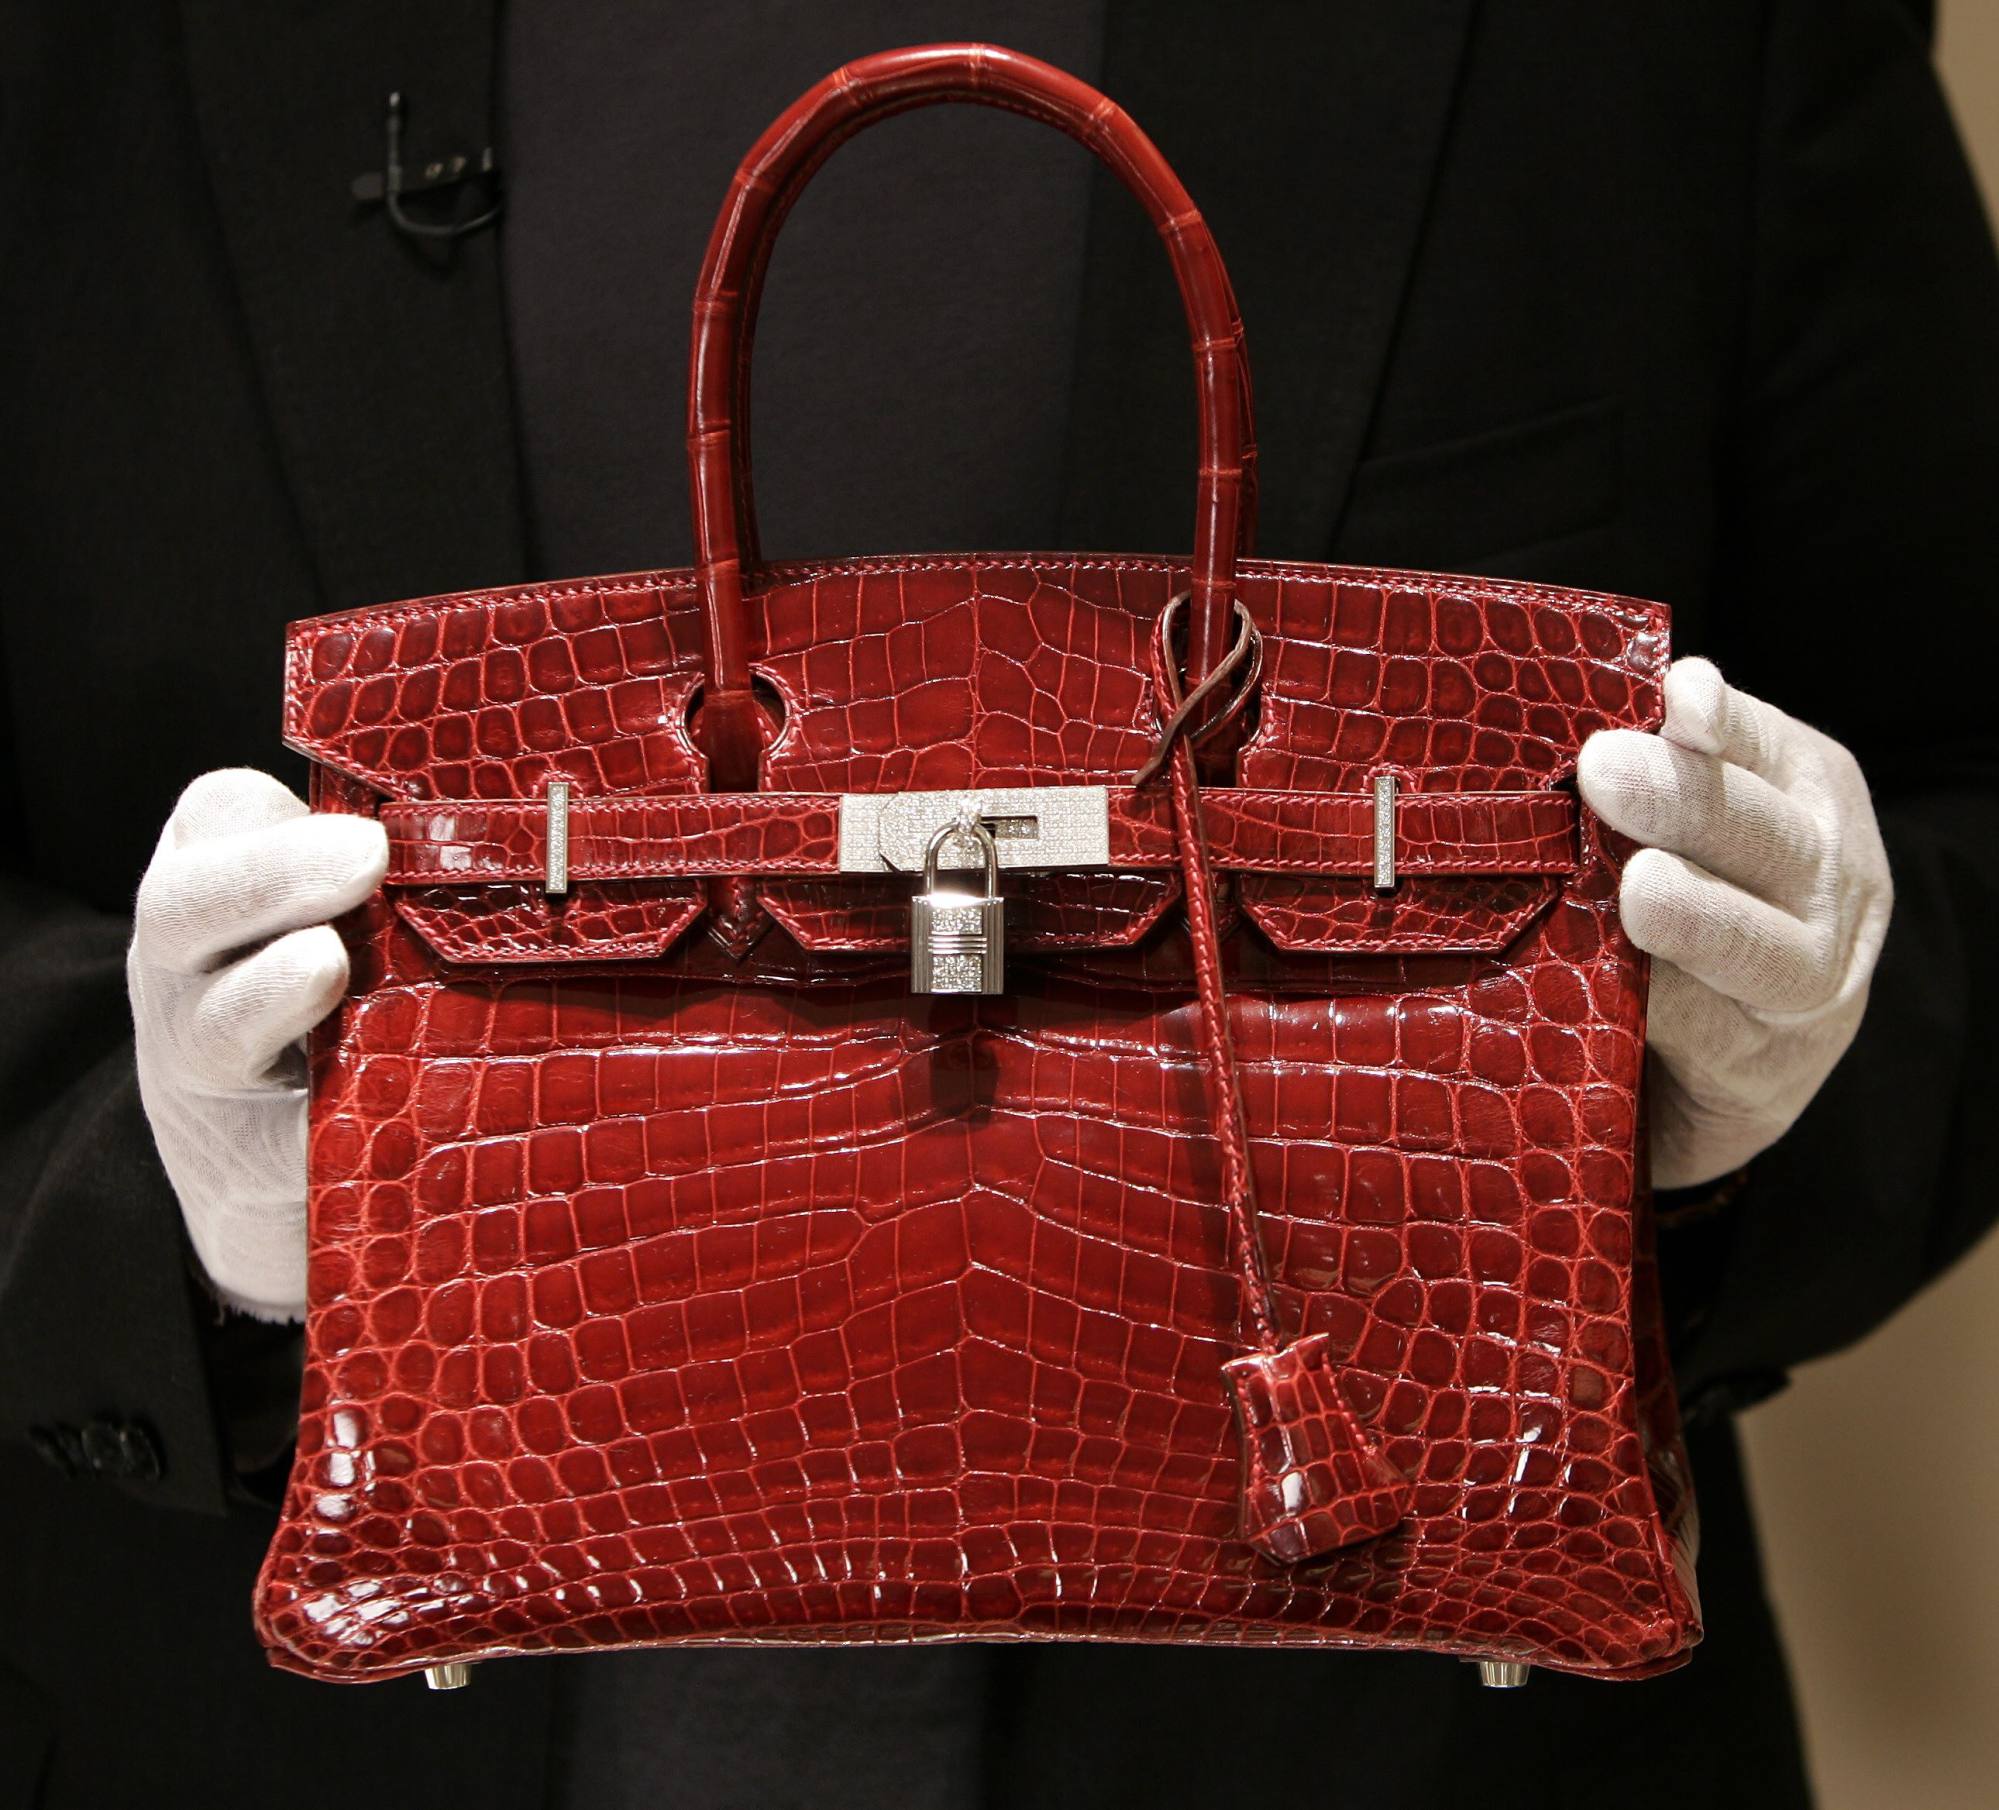 Thieves steal more than $400,000 in merchandise from Louis Vuitton store